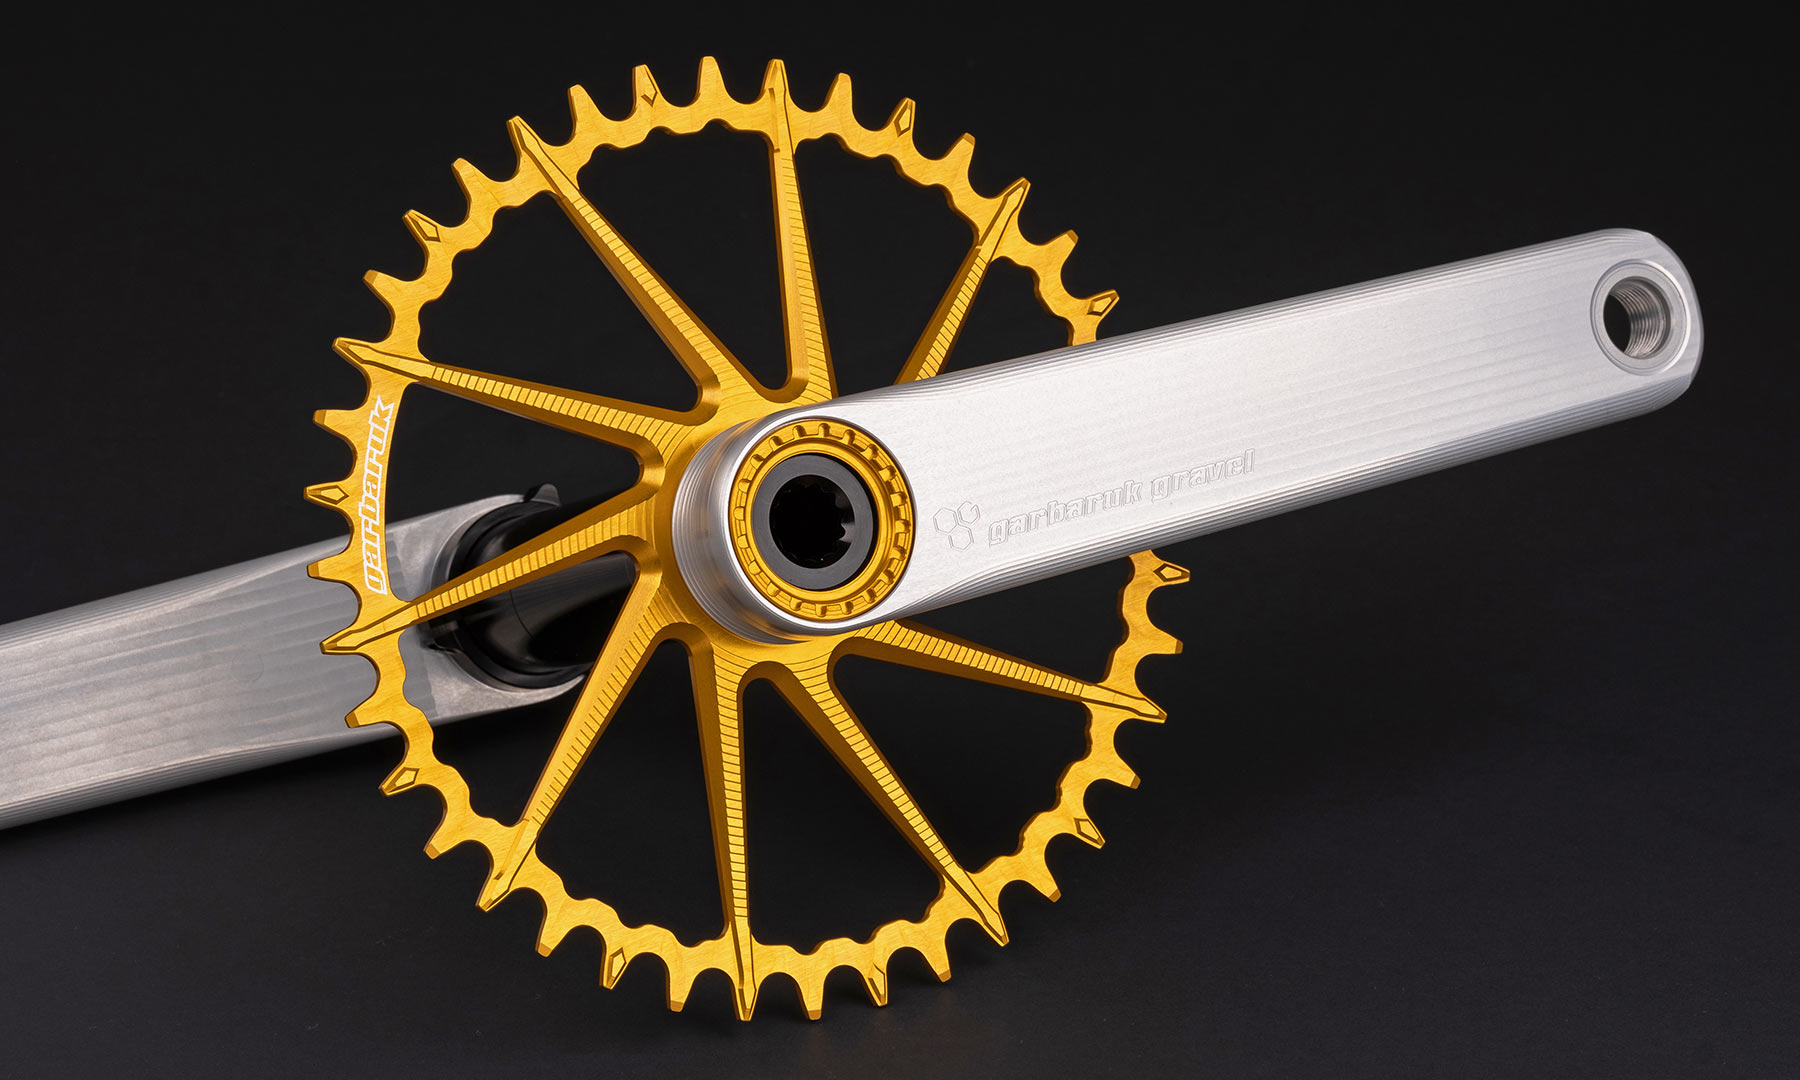 Garbaruk Gravel & Road Crankset, lightweight strong affordable alloy cranks EU-made, CNC-machined in Poland, silver and gold